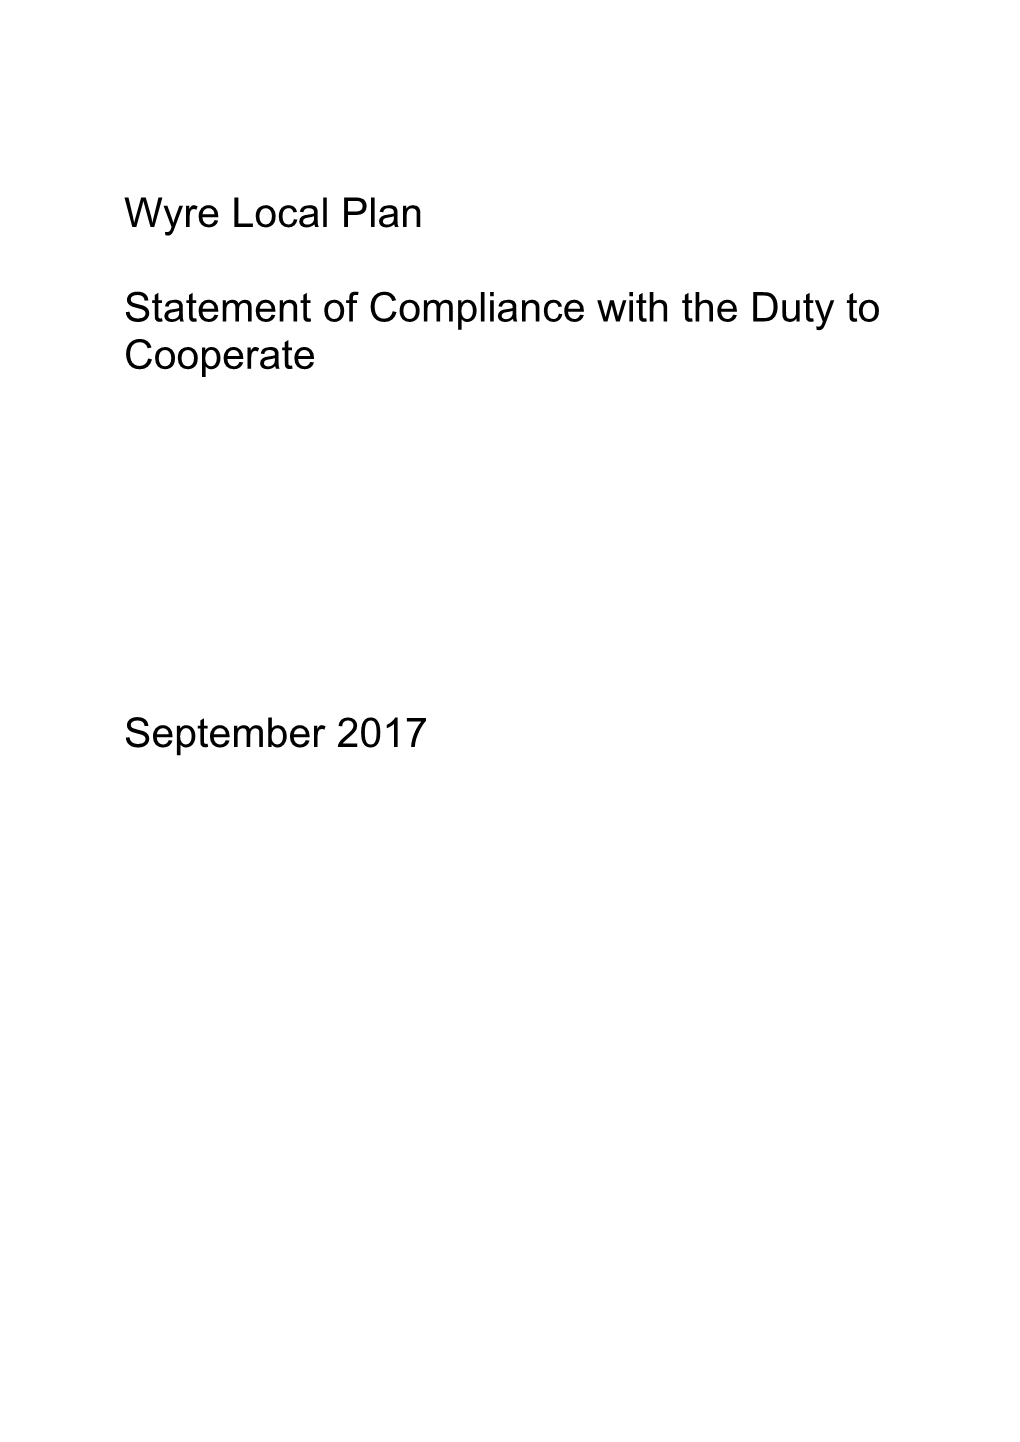 Duty to Cooperate Statement